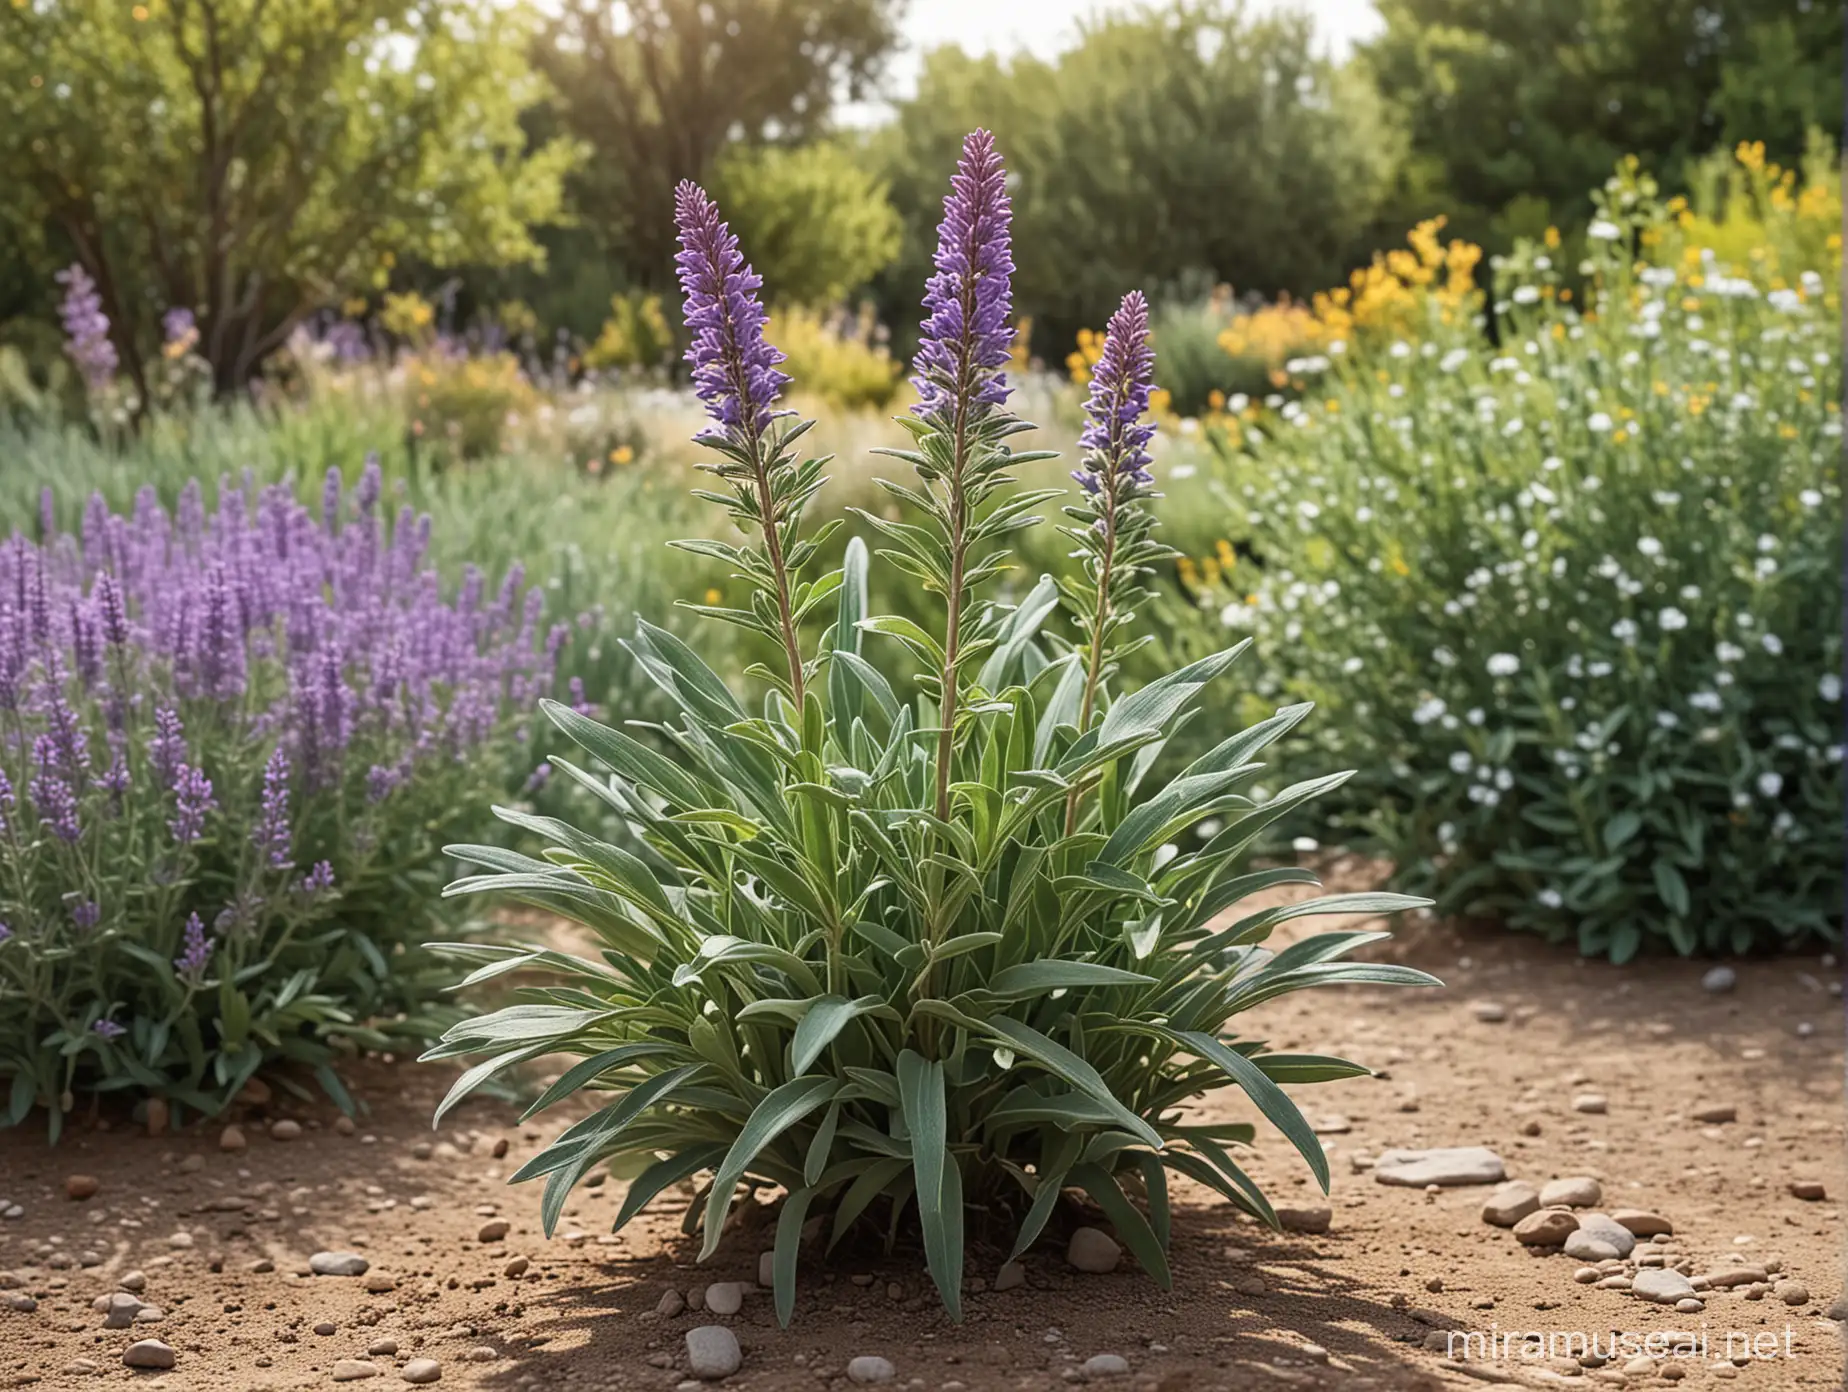 Blooming Sage Plant in Garden Setting